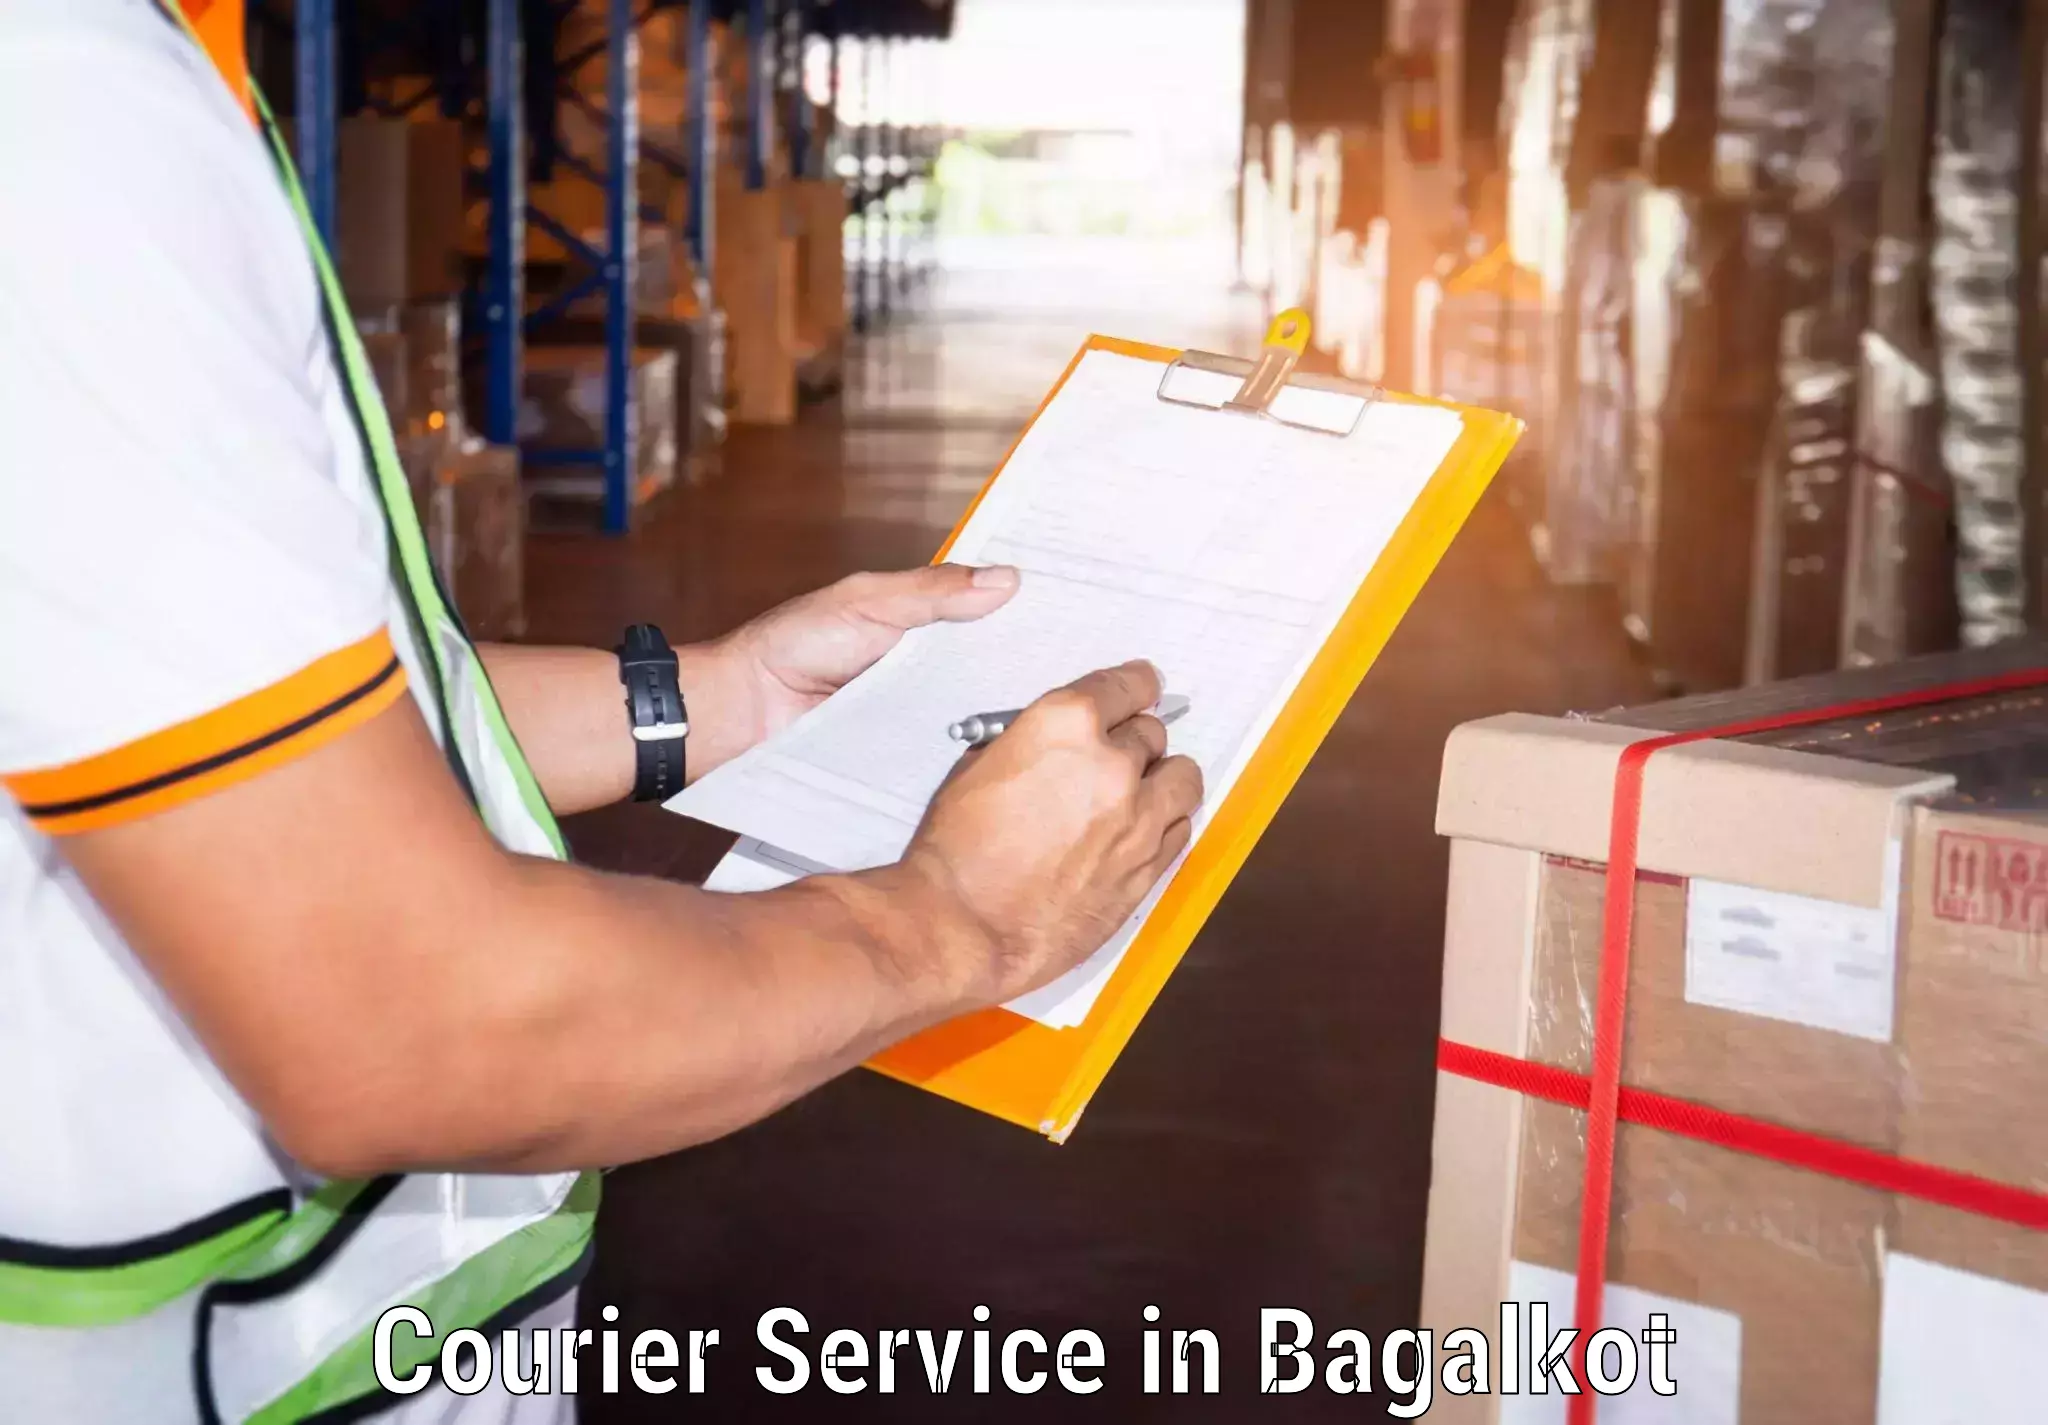 Customer-focused courier in Bagalkot